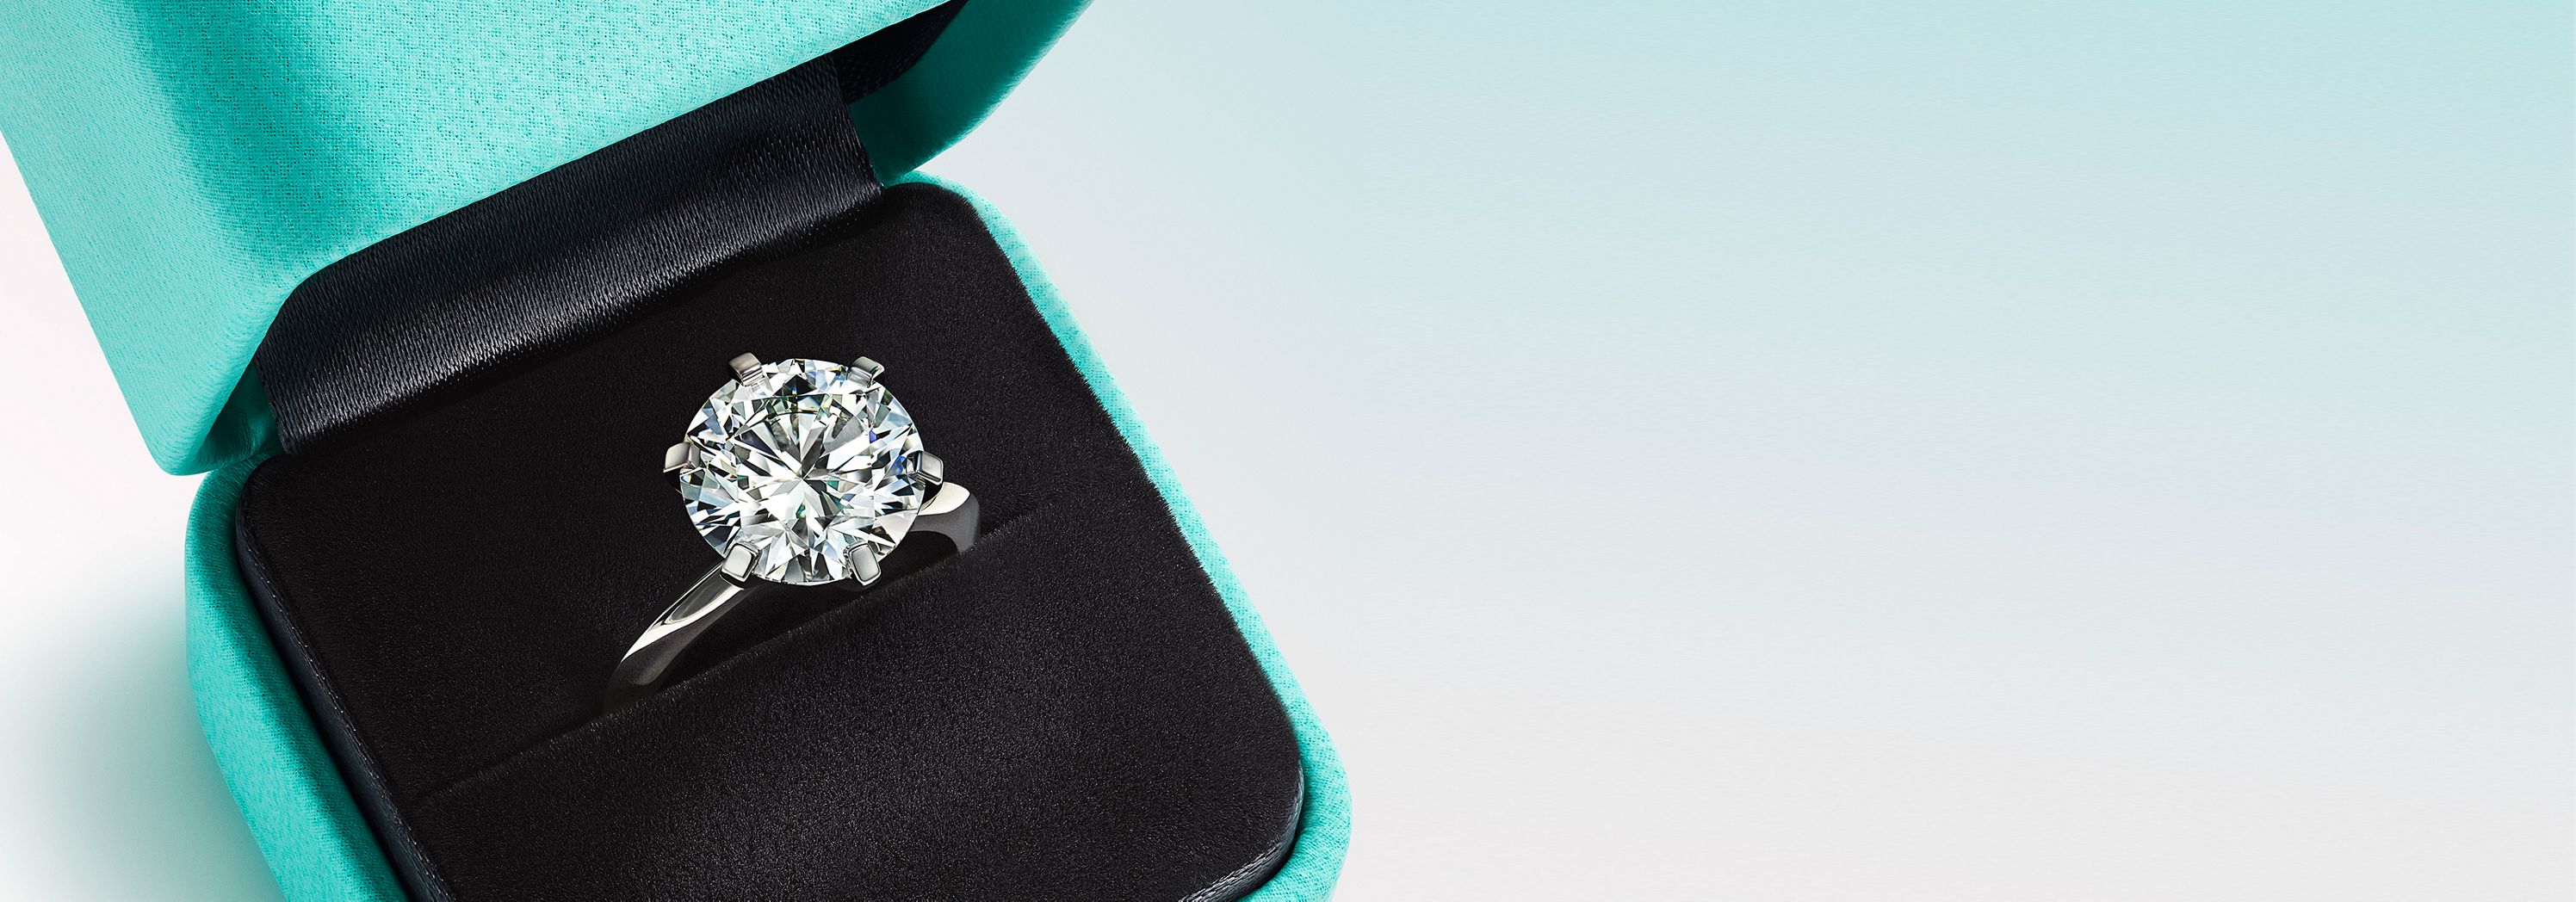 Tiffany & Co. will now reveal exactly where its diamonds come from